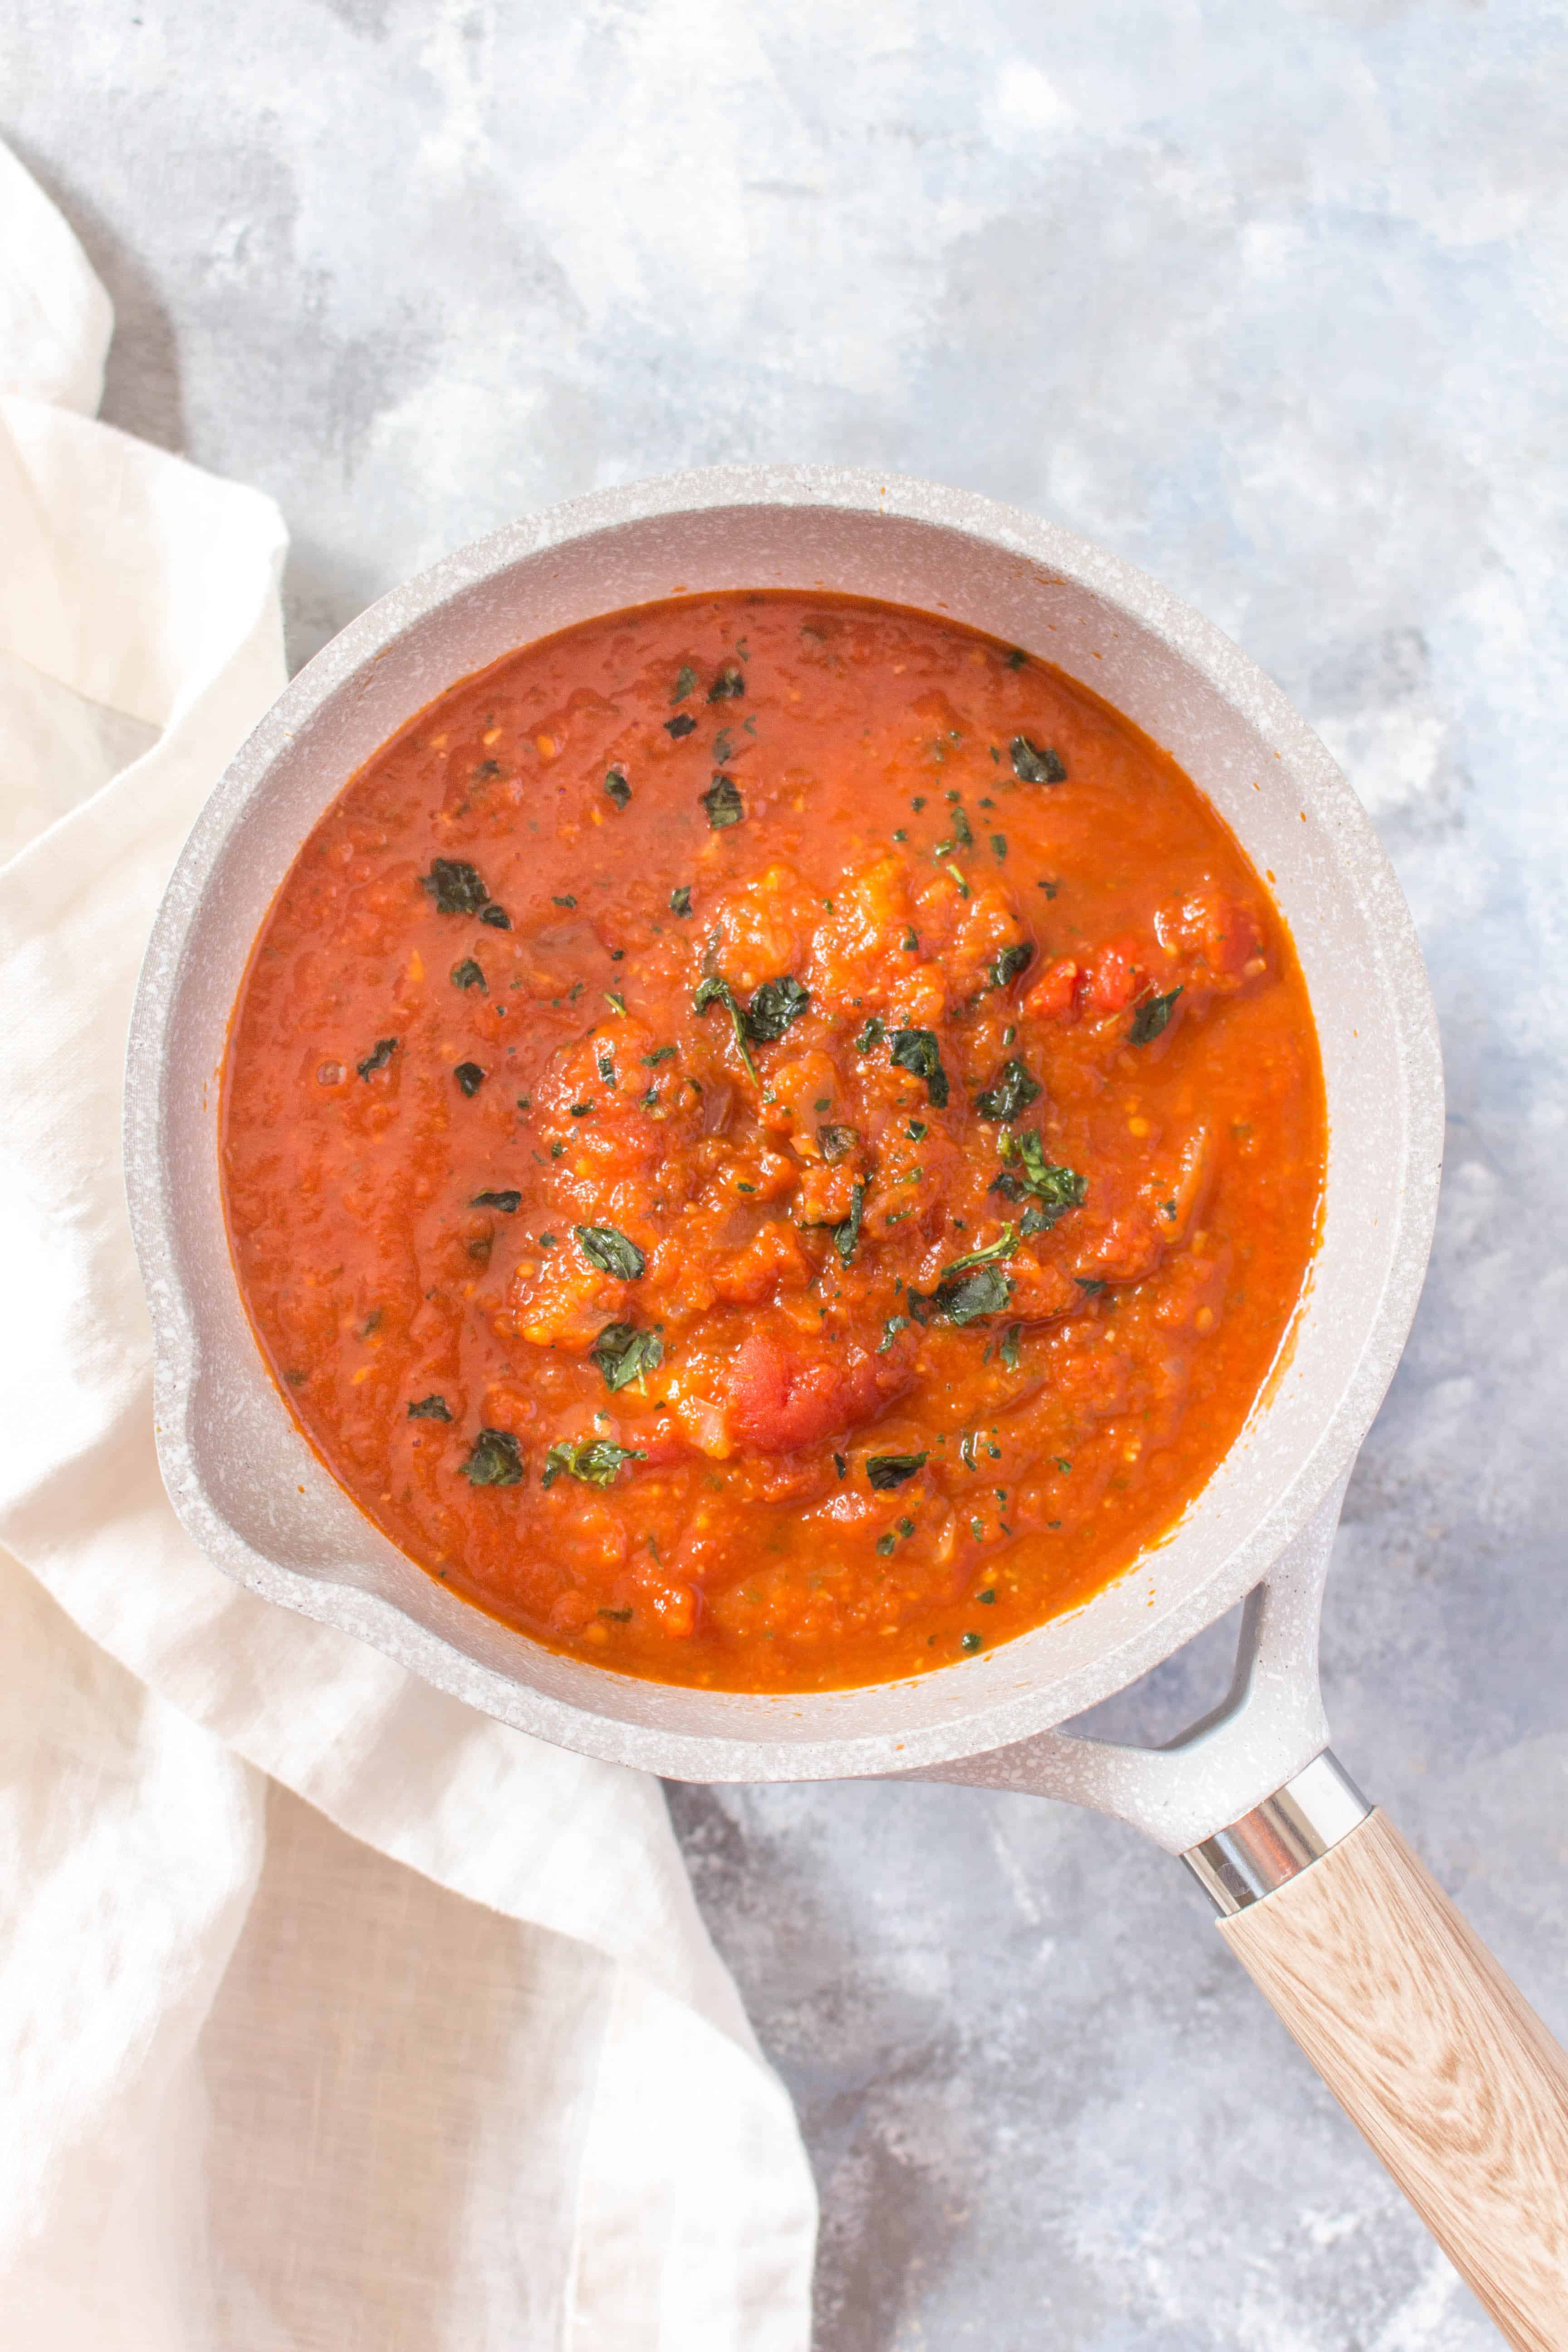 Make this basic homemade marinara sauce in a jiffy. It's rich in flavour, easy to make, and has no added sugar.